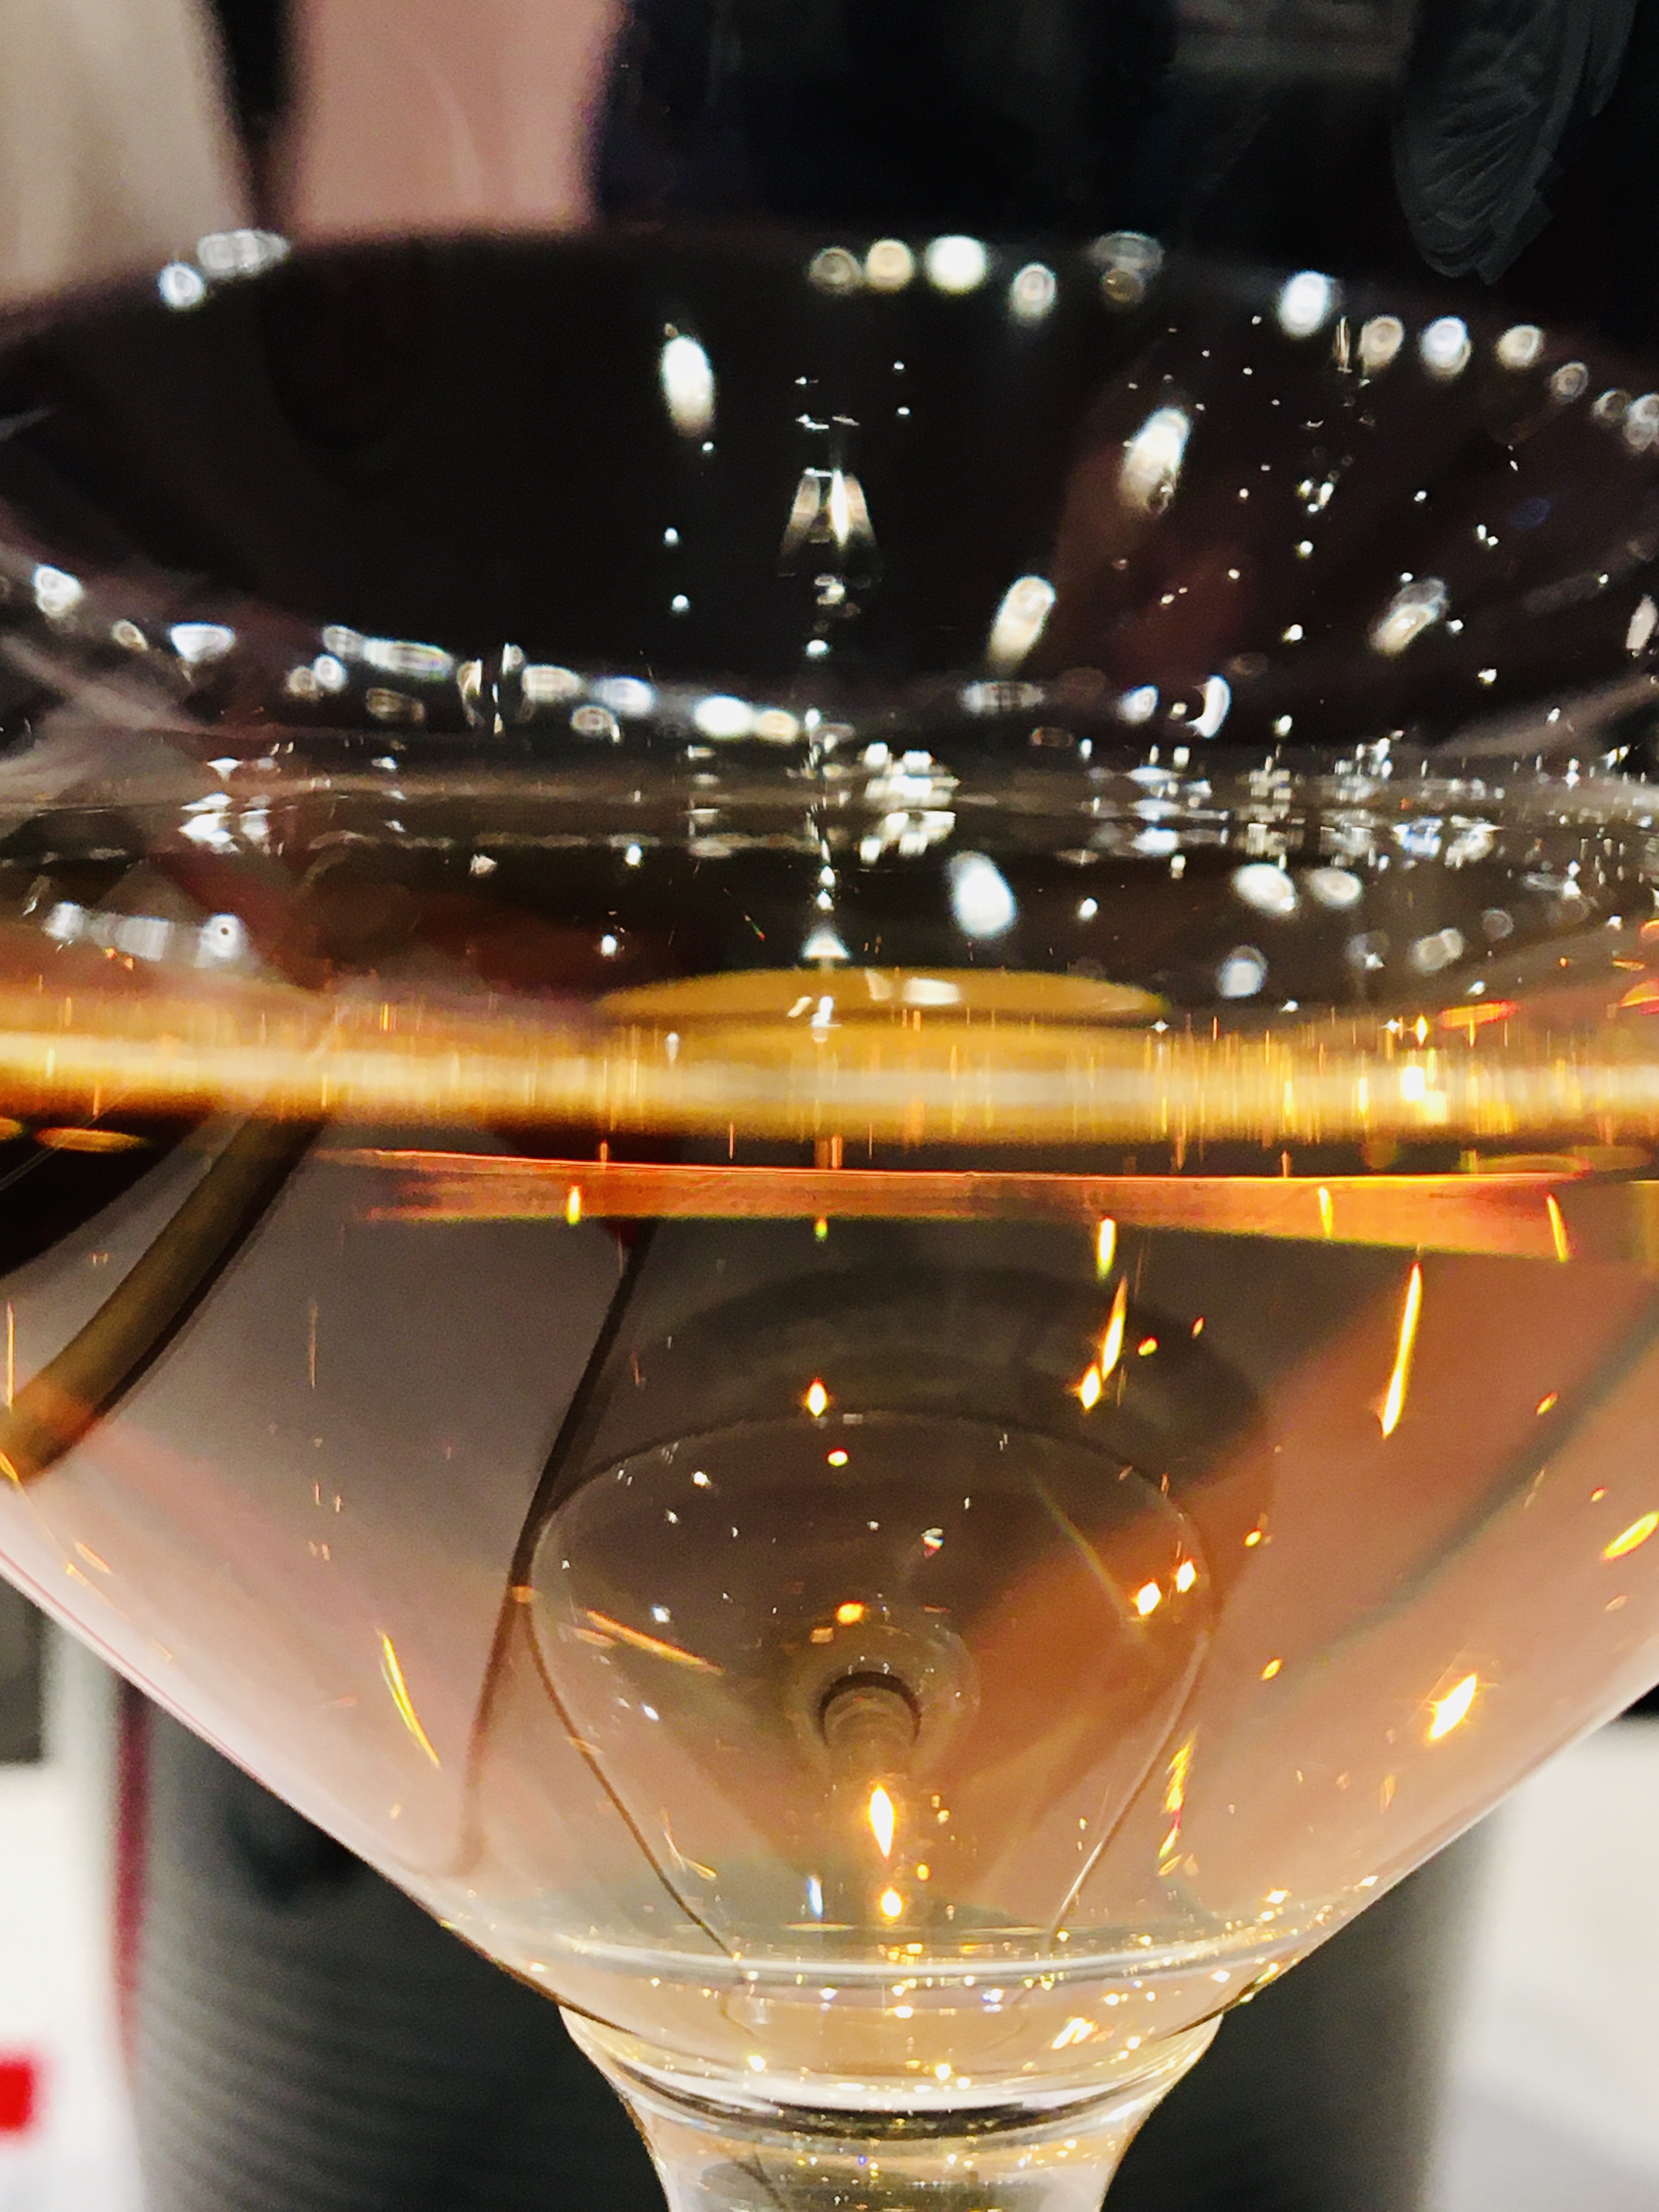 So lucious, a glass of Yquem is as beautiful as it tastes! 